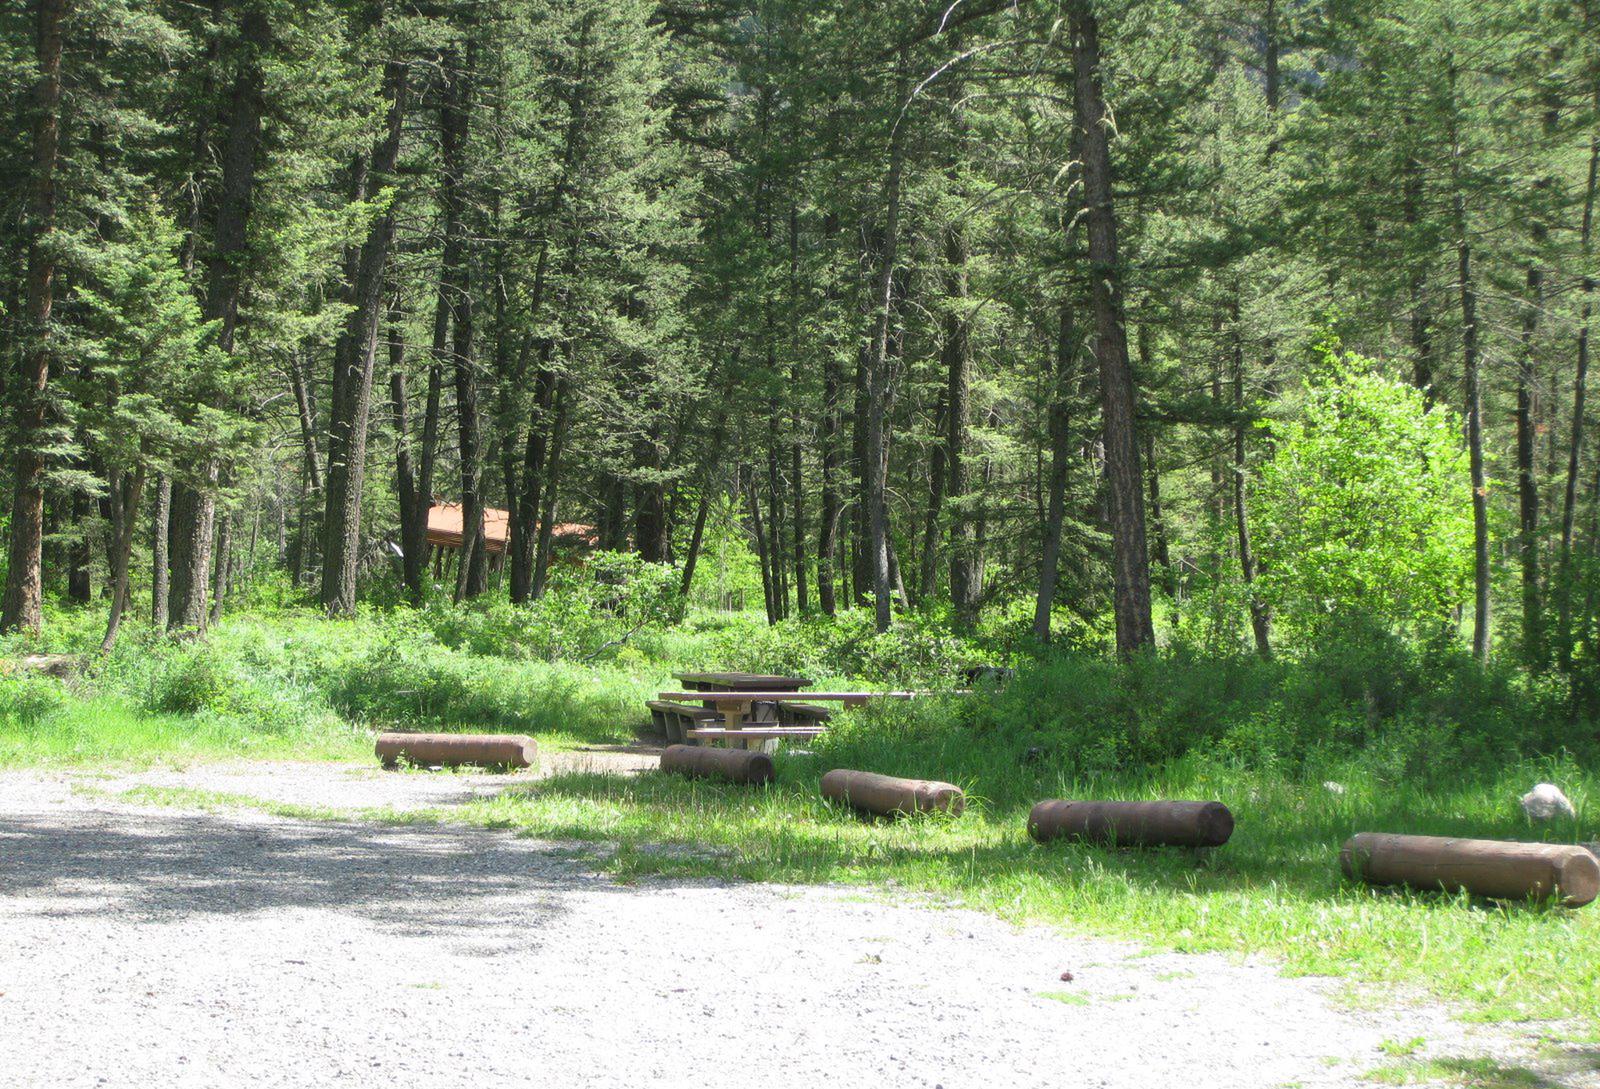 Group Area Site 26 - campsite surrounded by pine trees, picnic table & fire ringSite 26